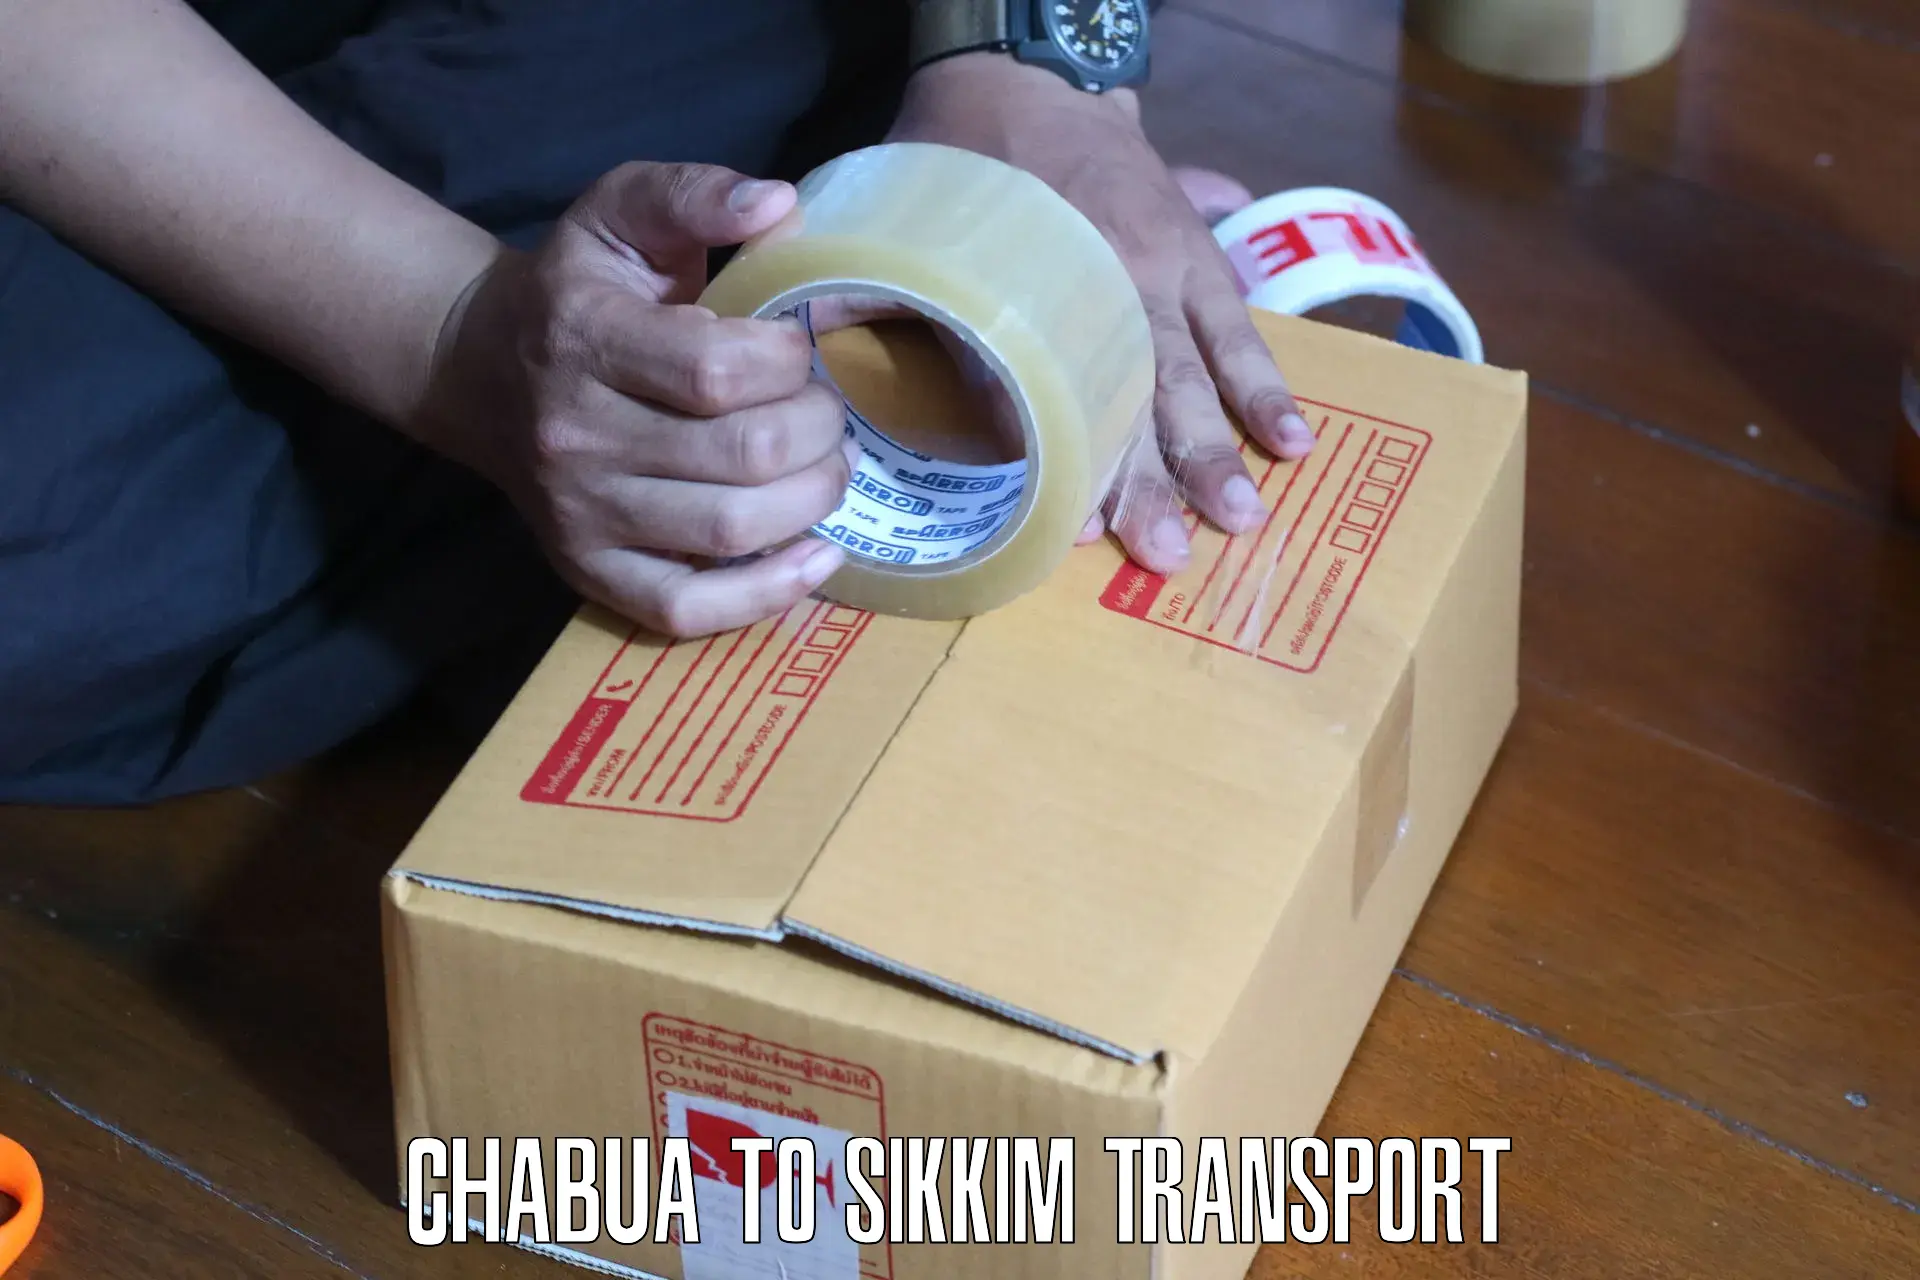 Transport bike from one state to another Chabua to Mangan